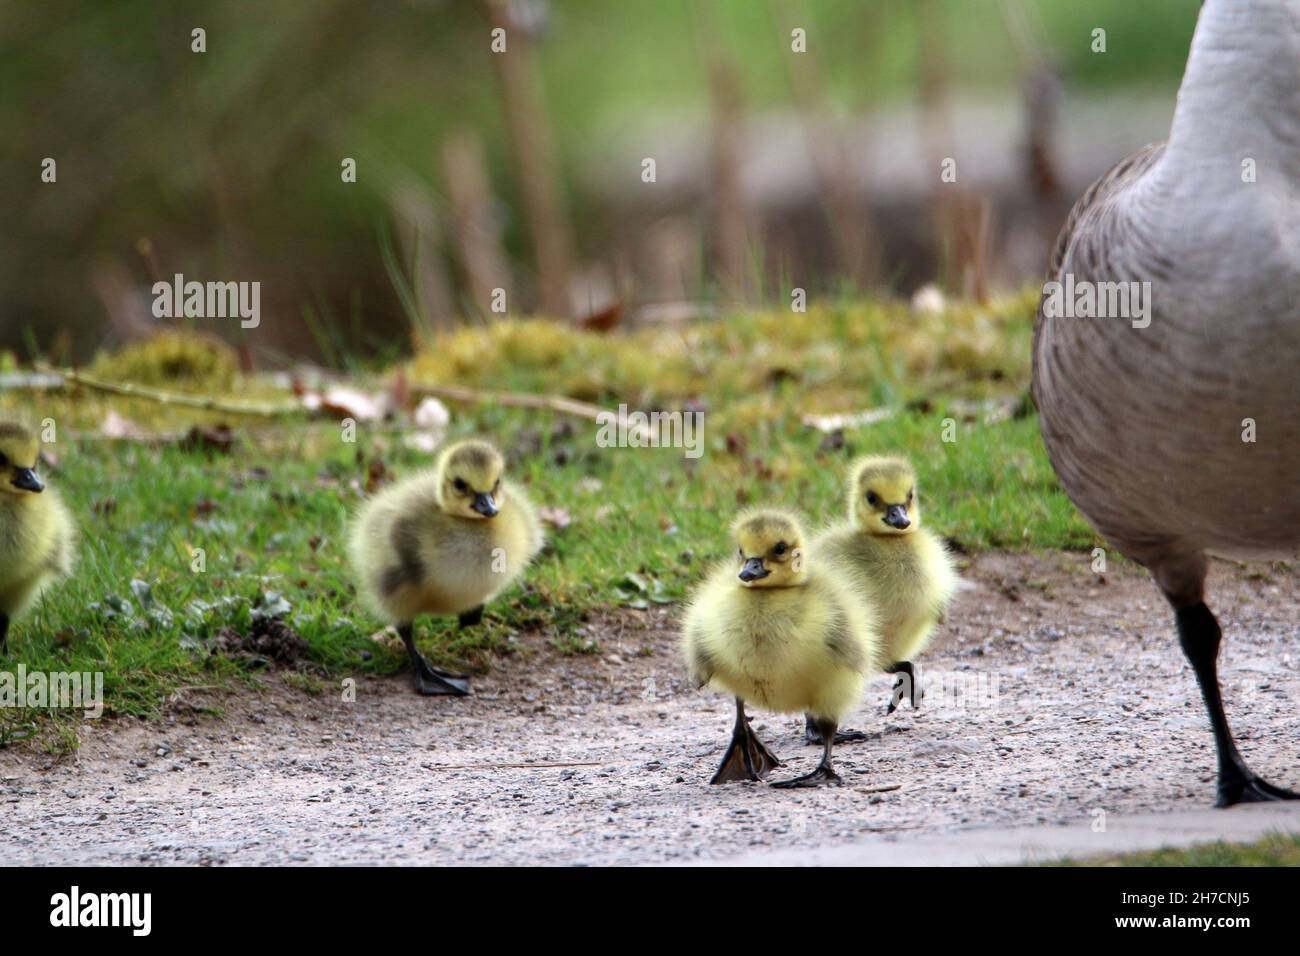 Canada goose (Branta canadensis), goslings cross a path next to their mother, Germany Stock Photo